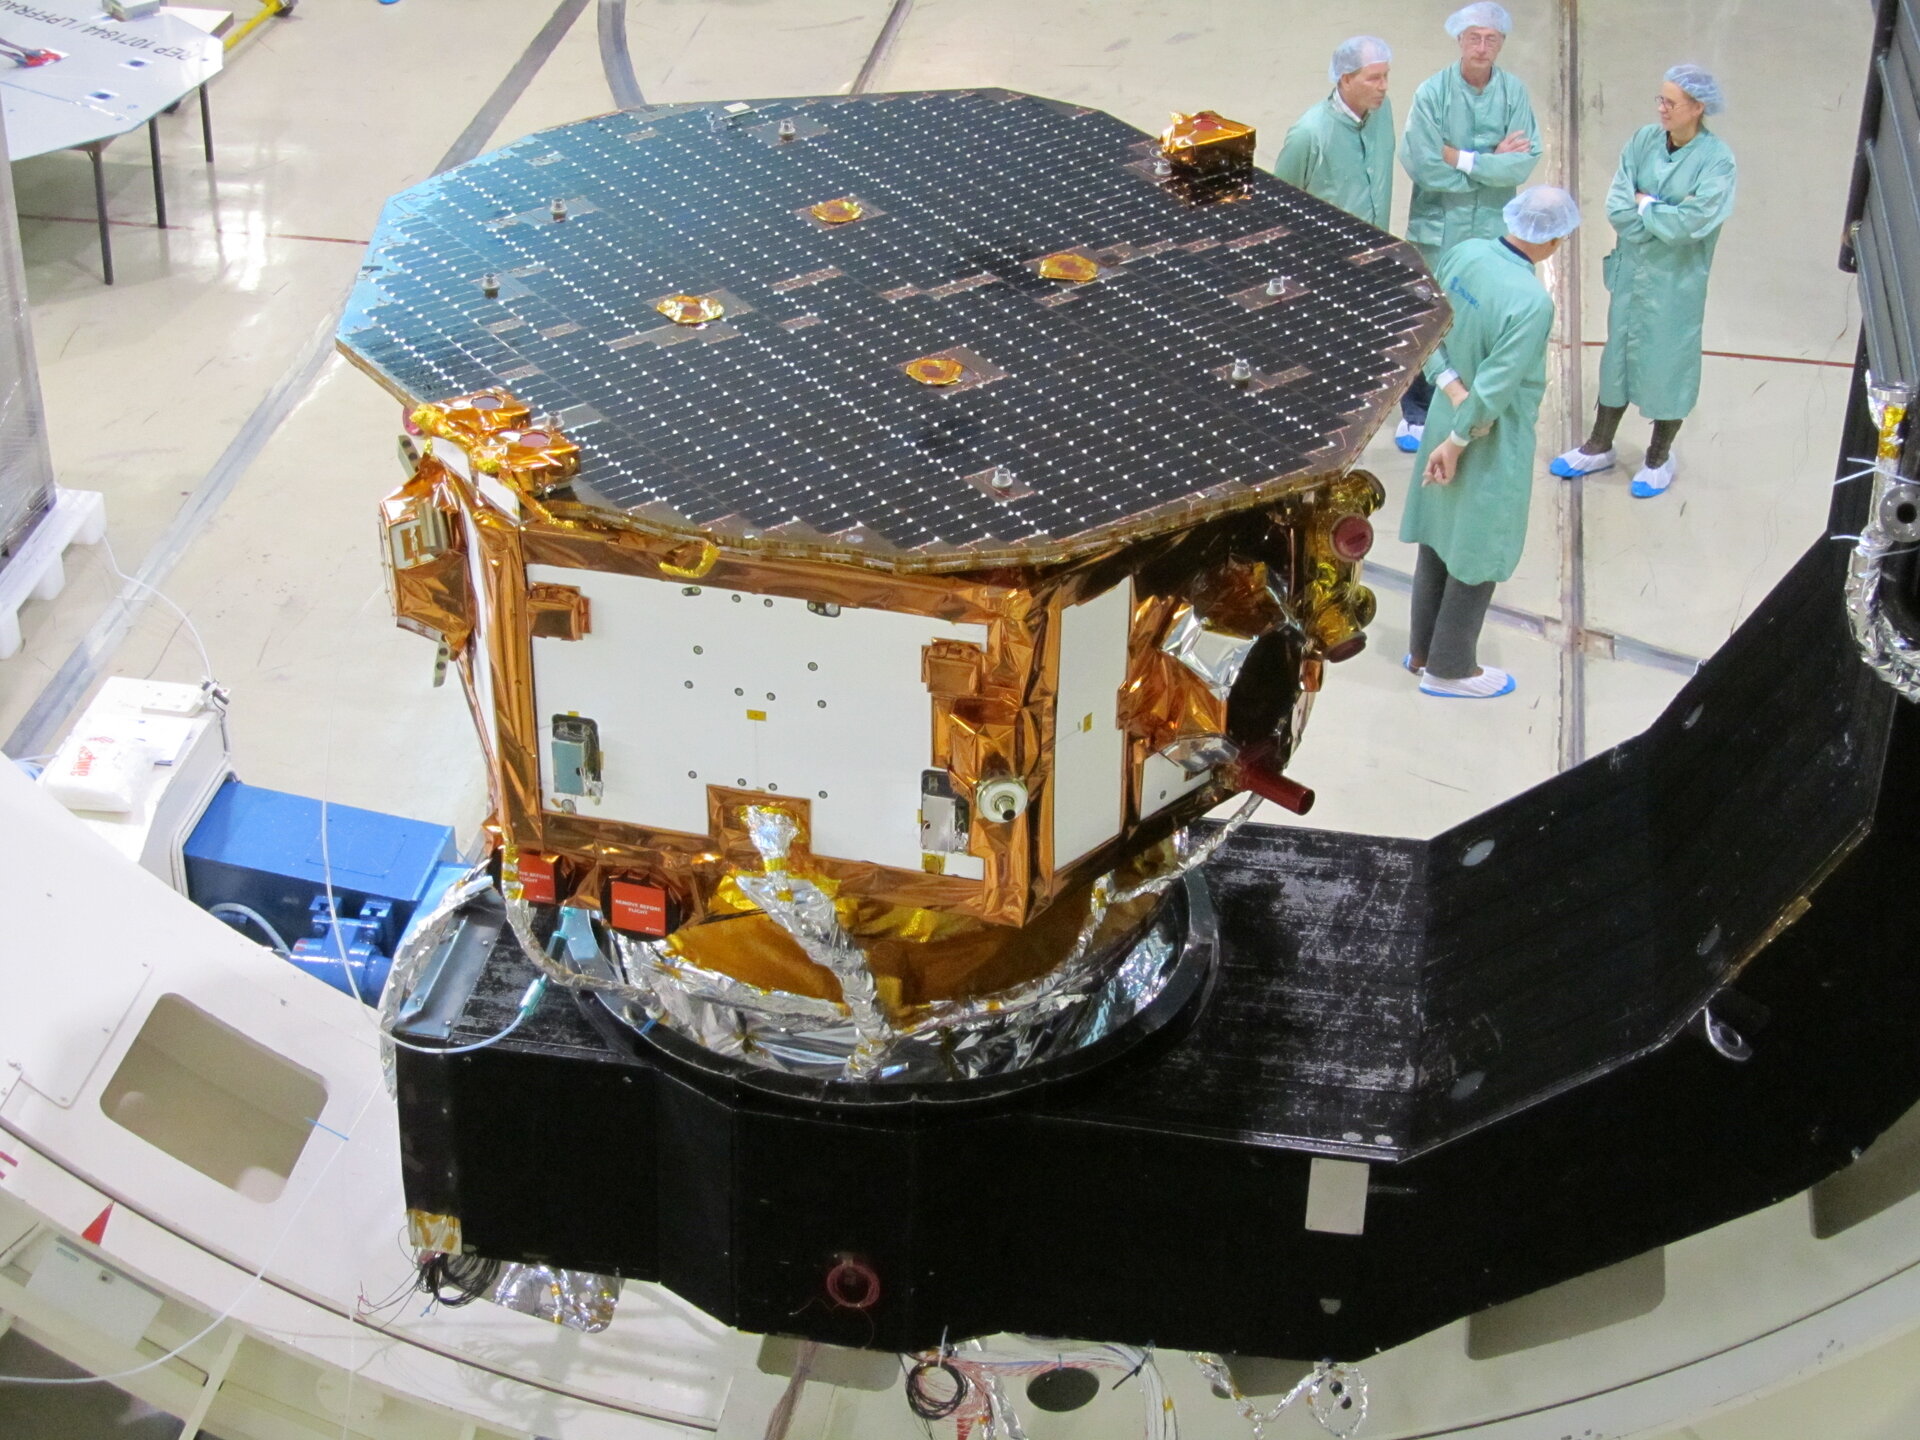 LISA Pathfinder with scientists in the clean room test environment